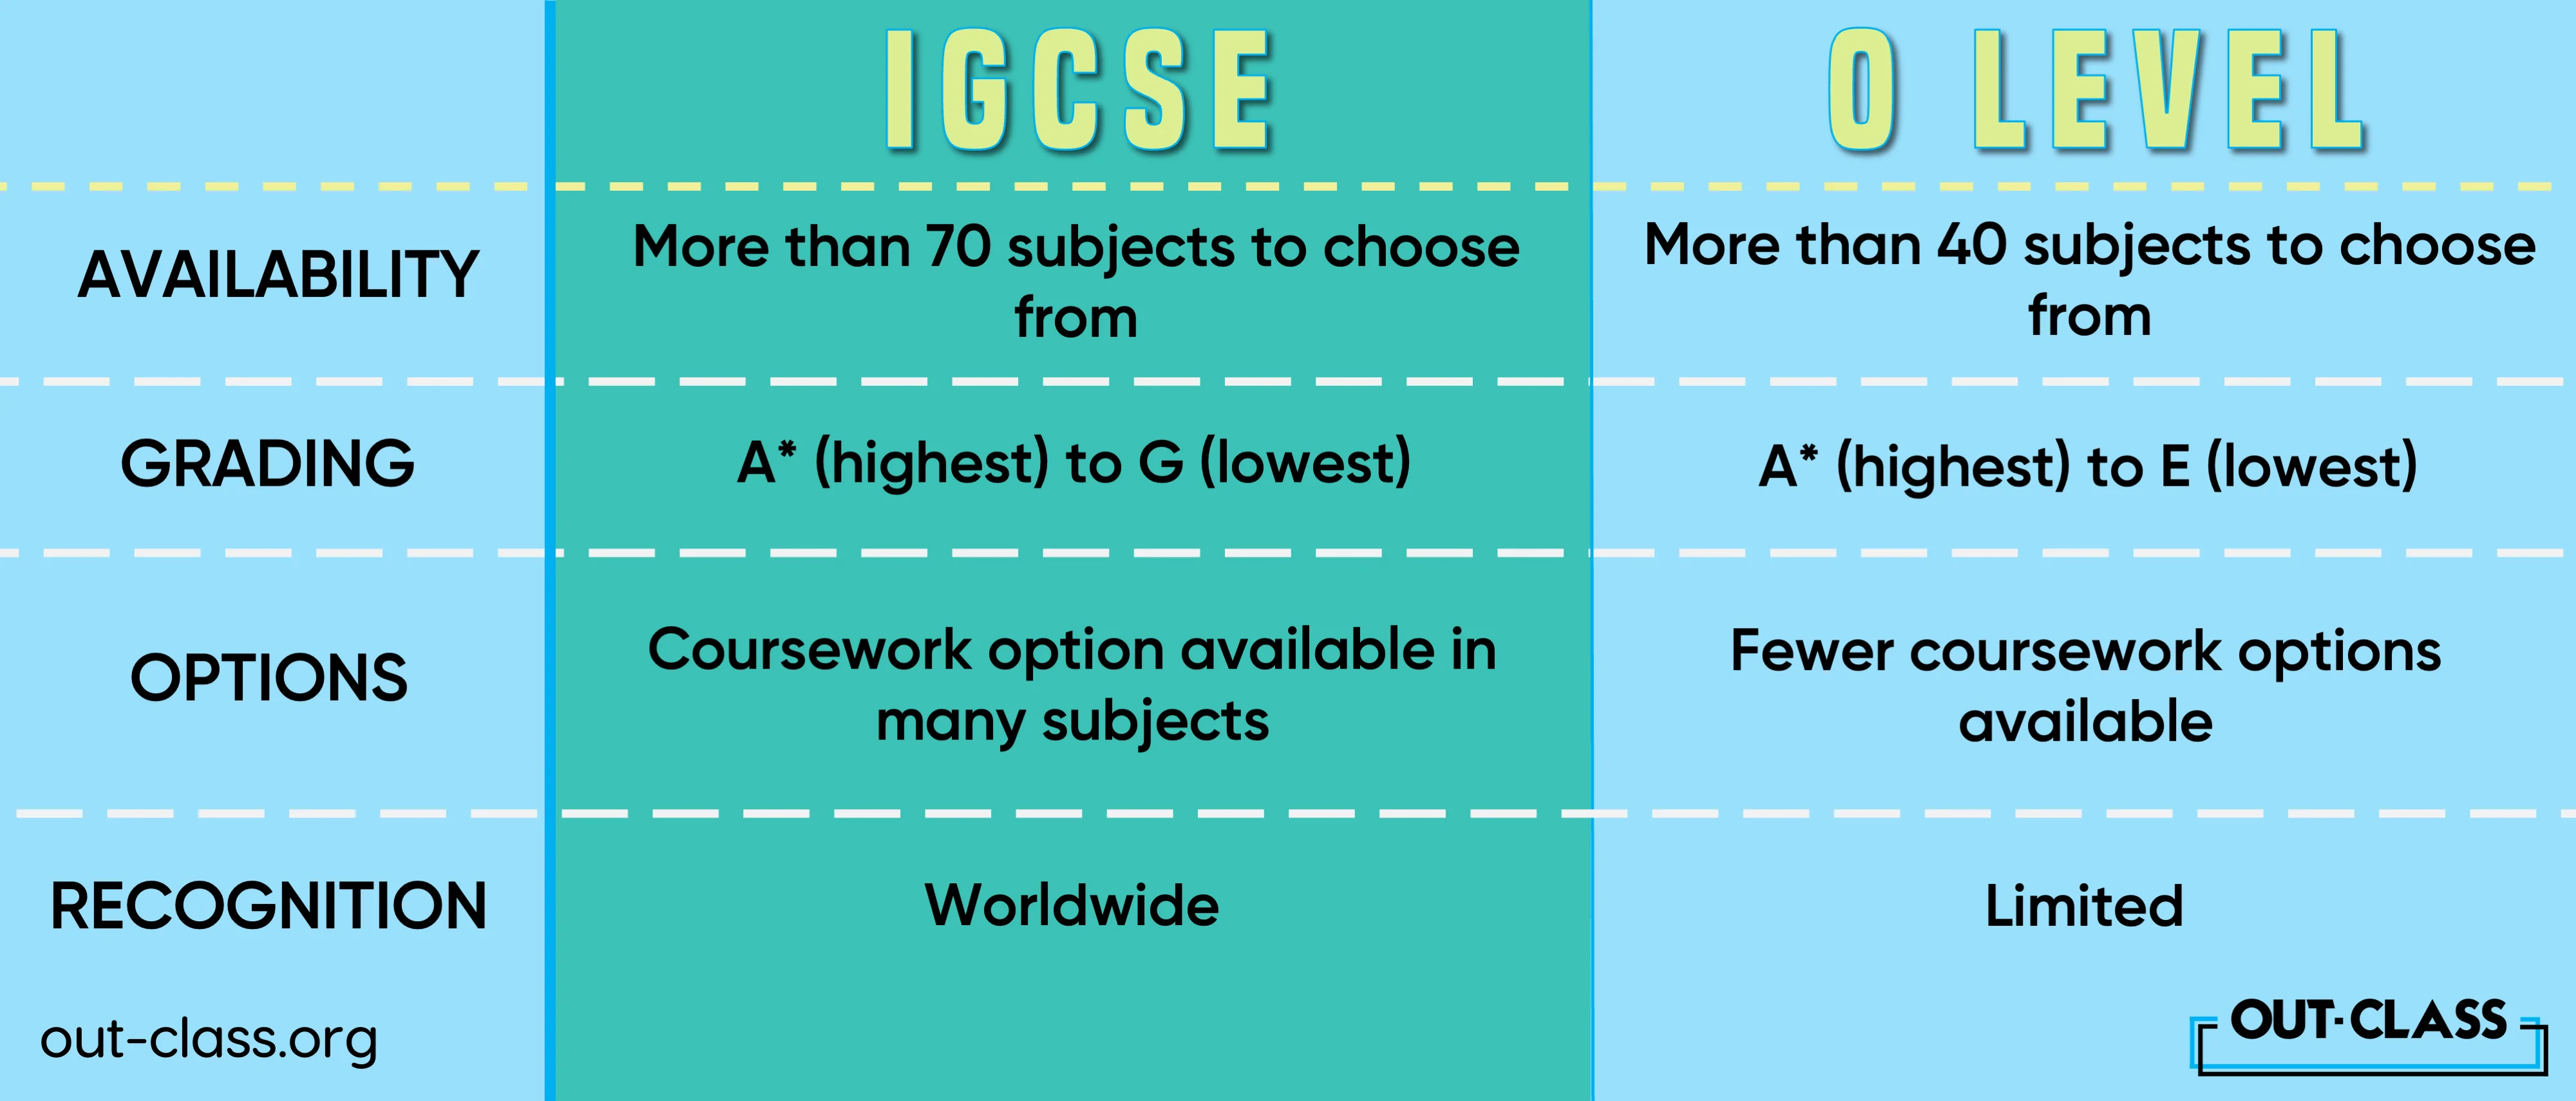 Differences between igcse and o levels are identified.